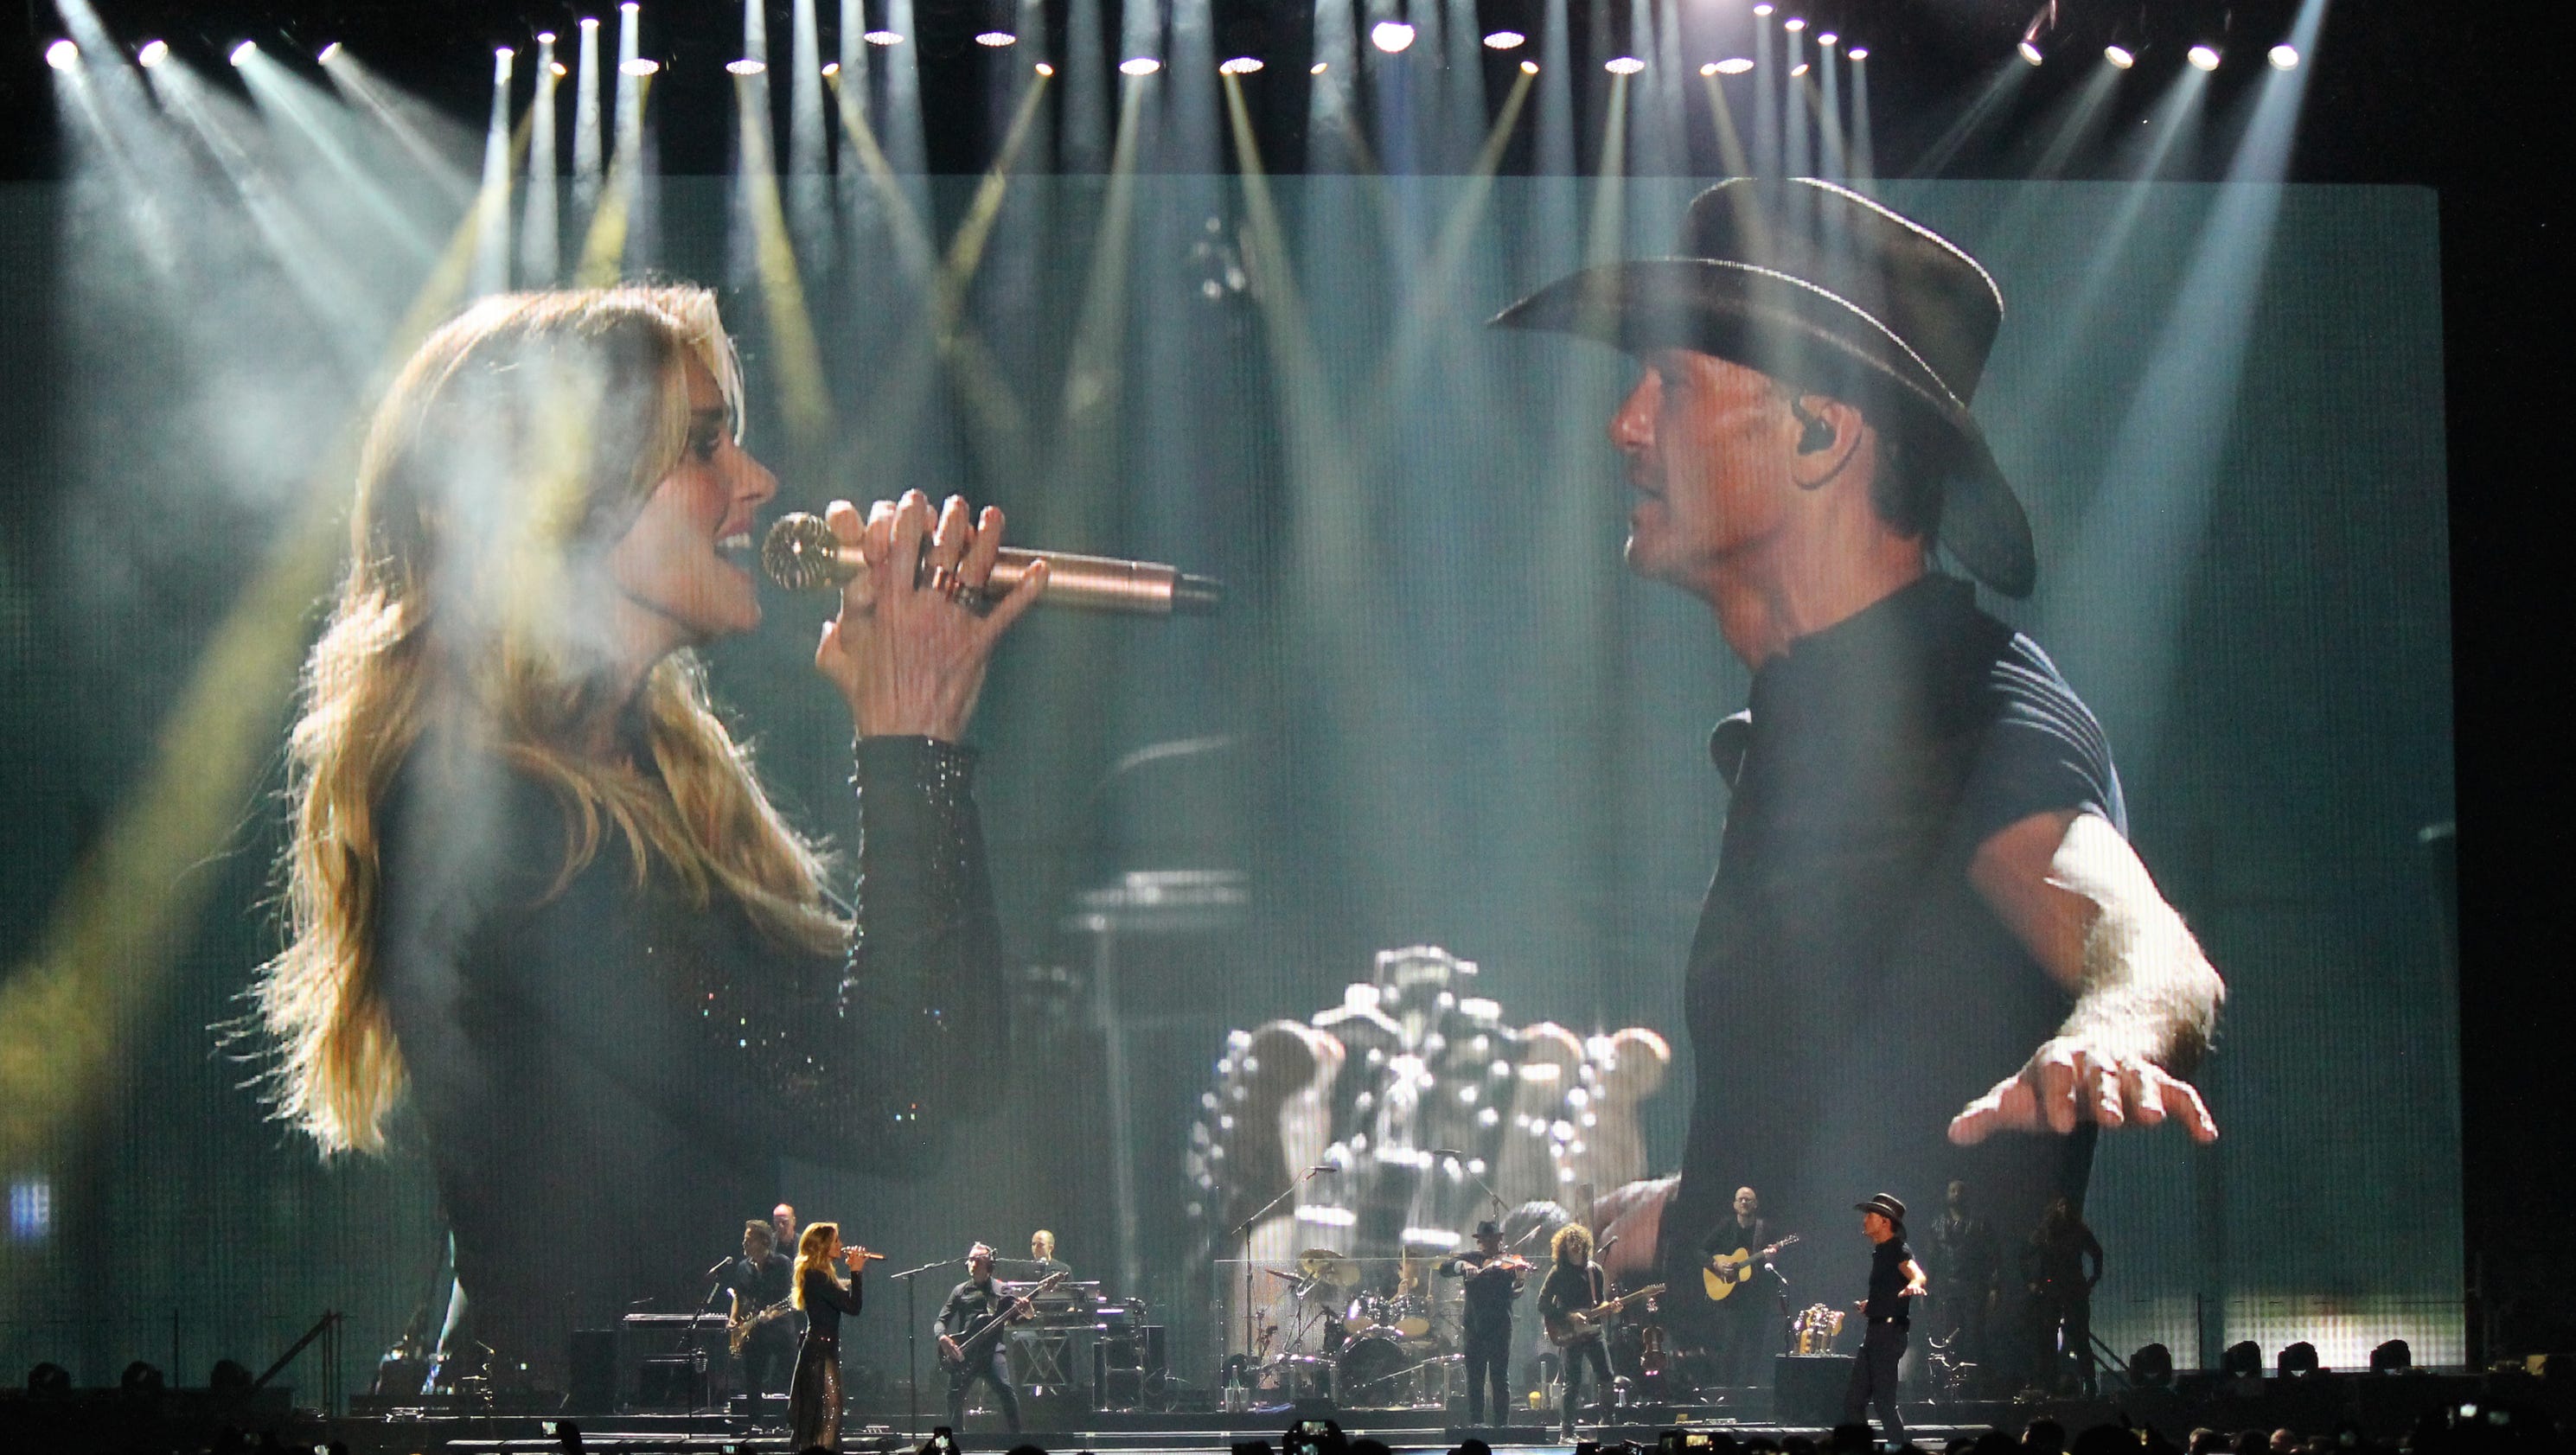 Faith Hill, Tim McGraw showcase eclectic influences in love-inspired performance - Milwaukee Journal Sentinel